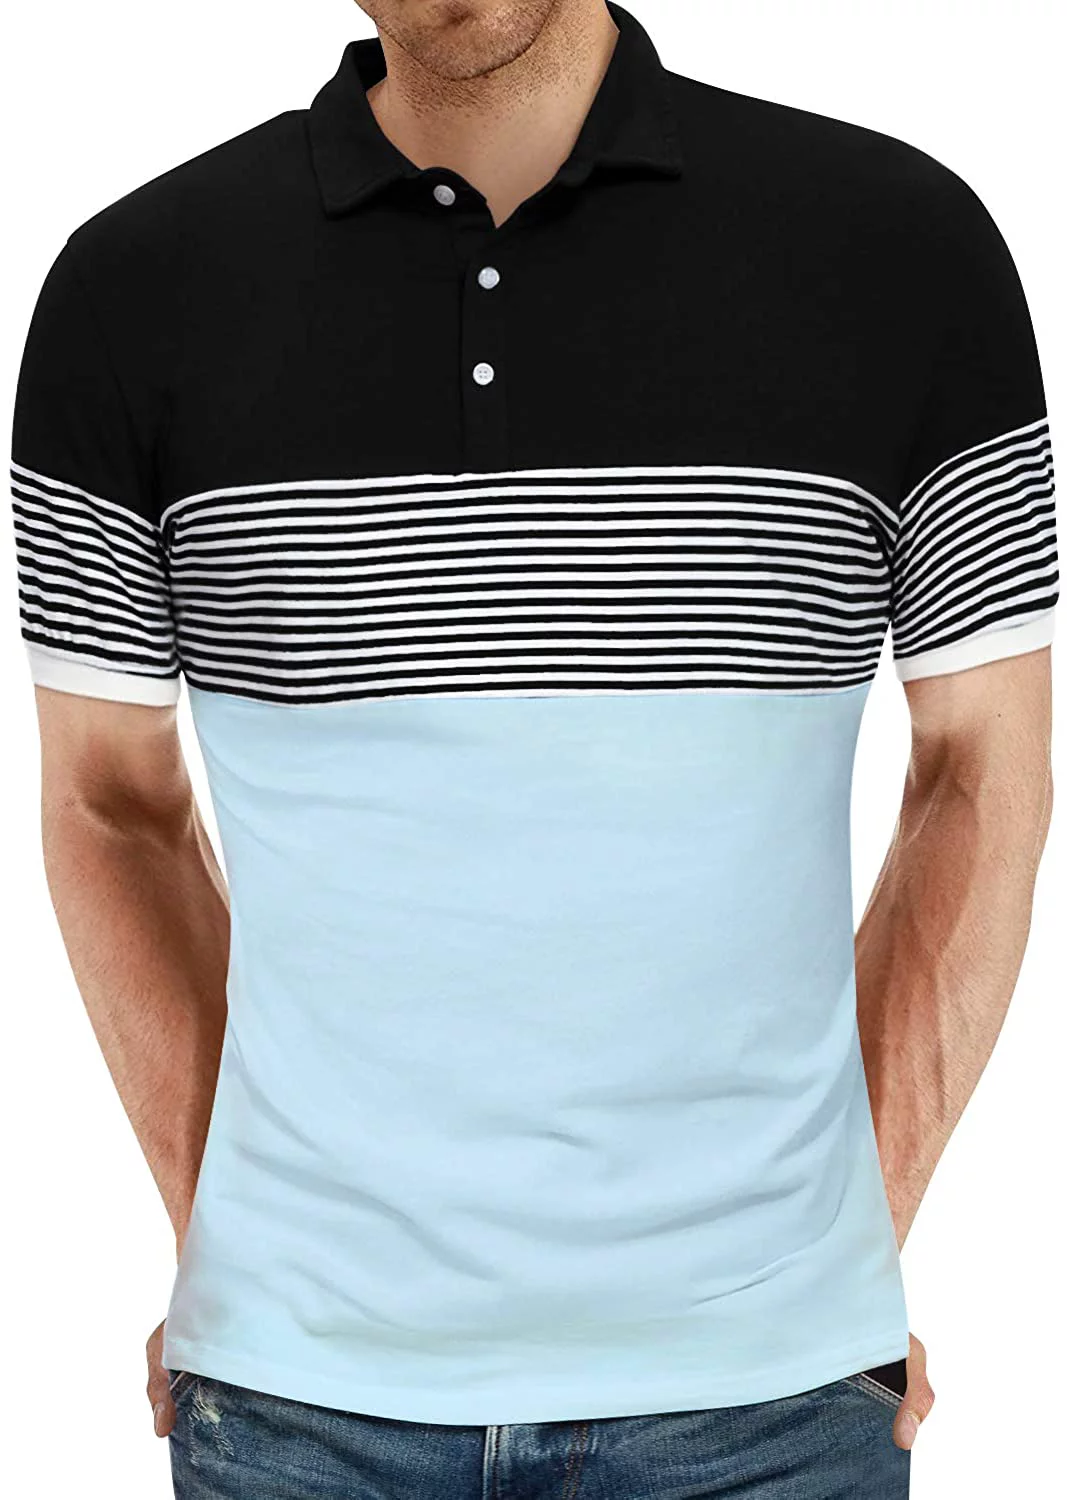 Wholesale Polo Shirt Supplier In Italy